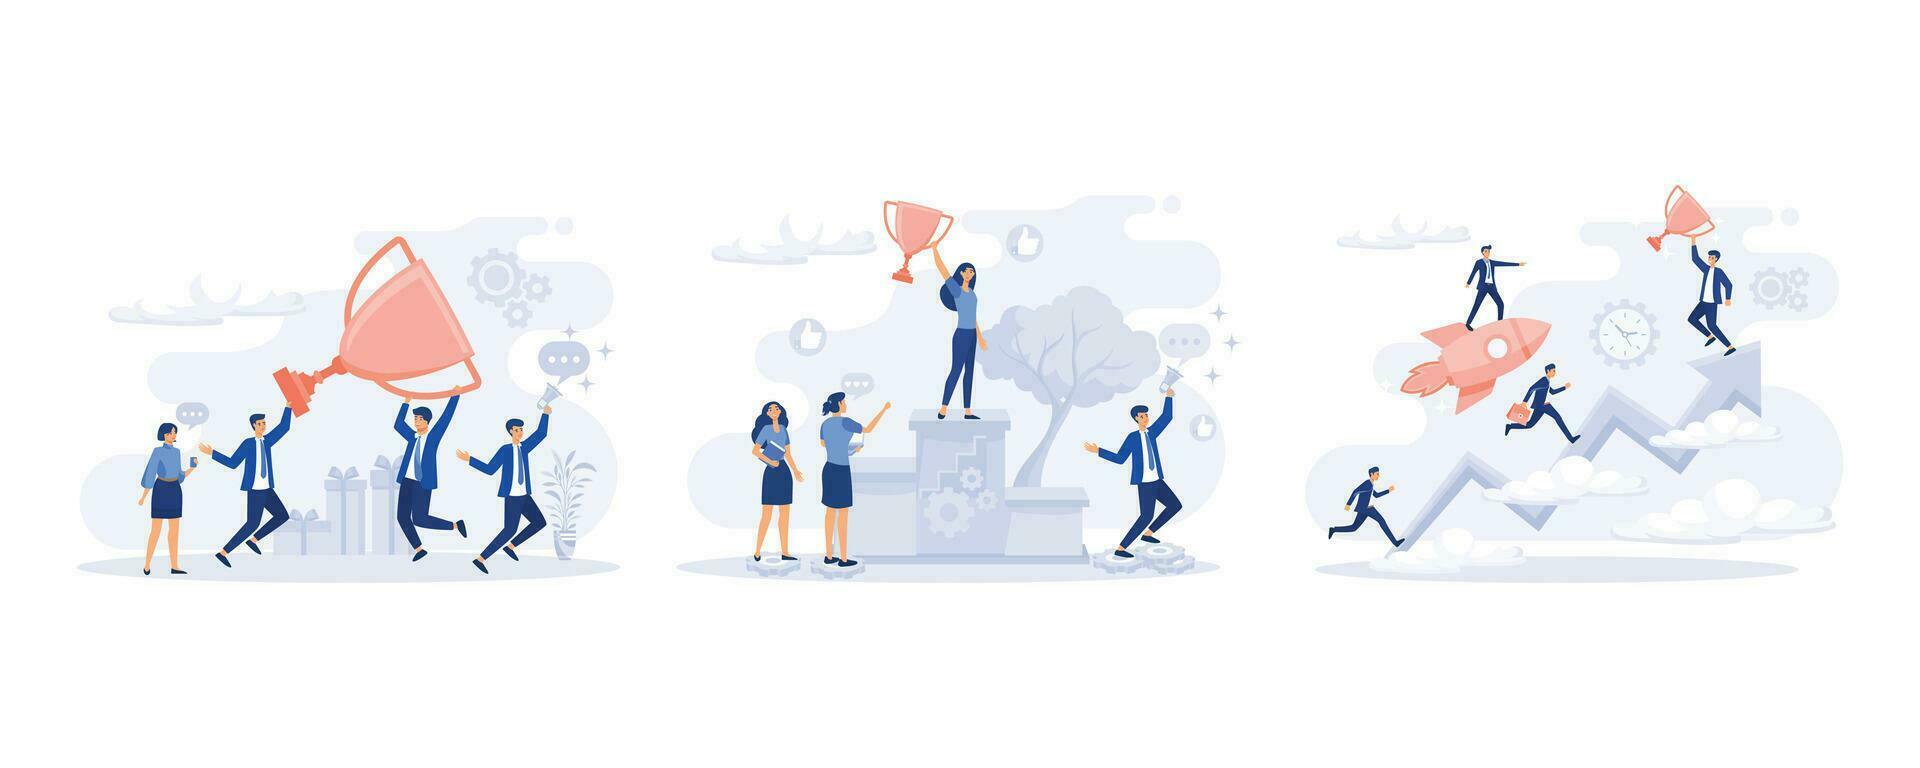 Competitive process in business. Business people run to their goal, flat vector modern illustration